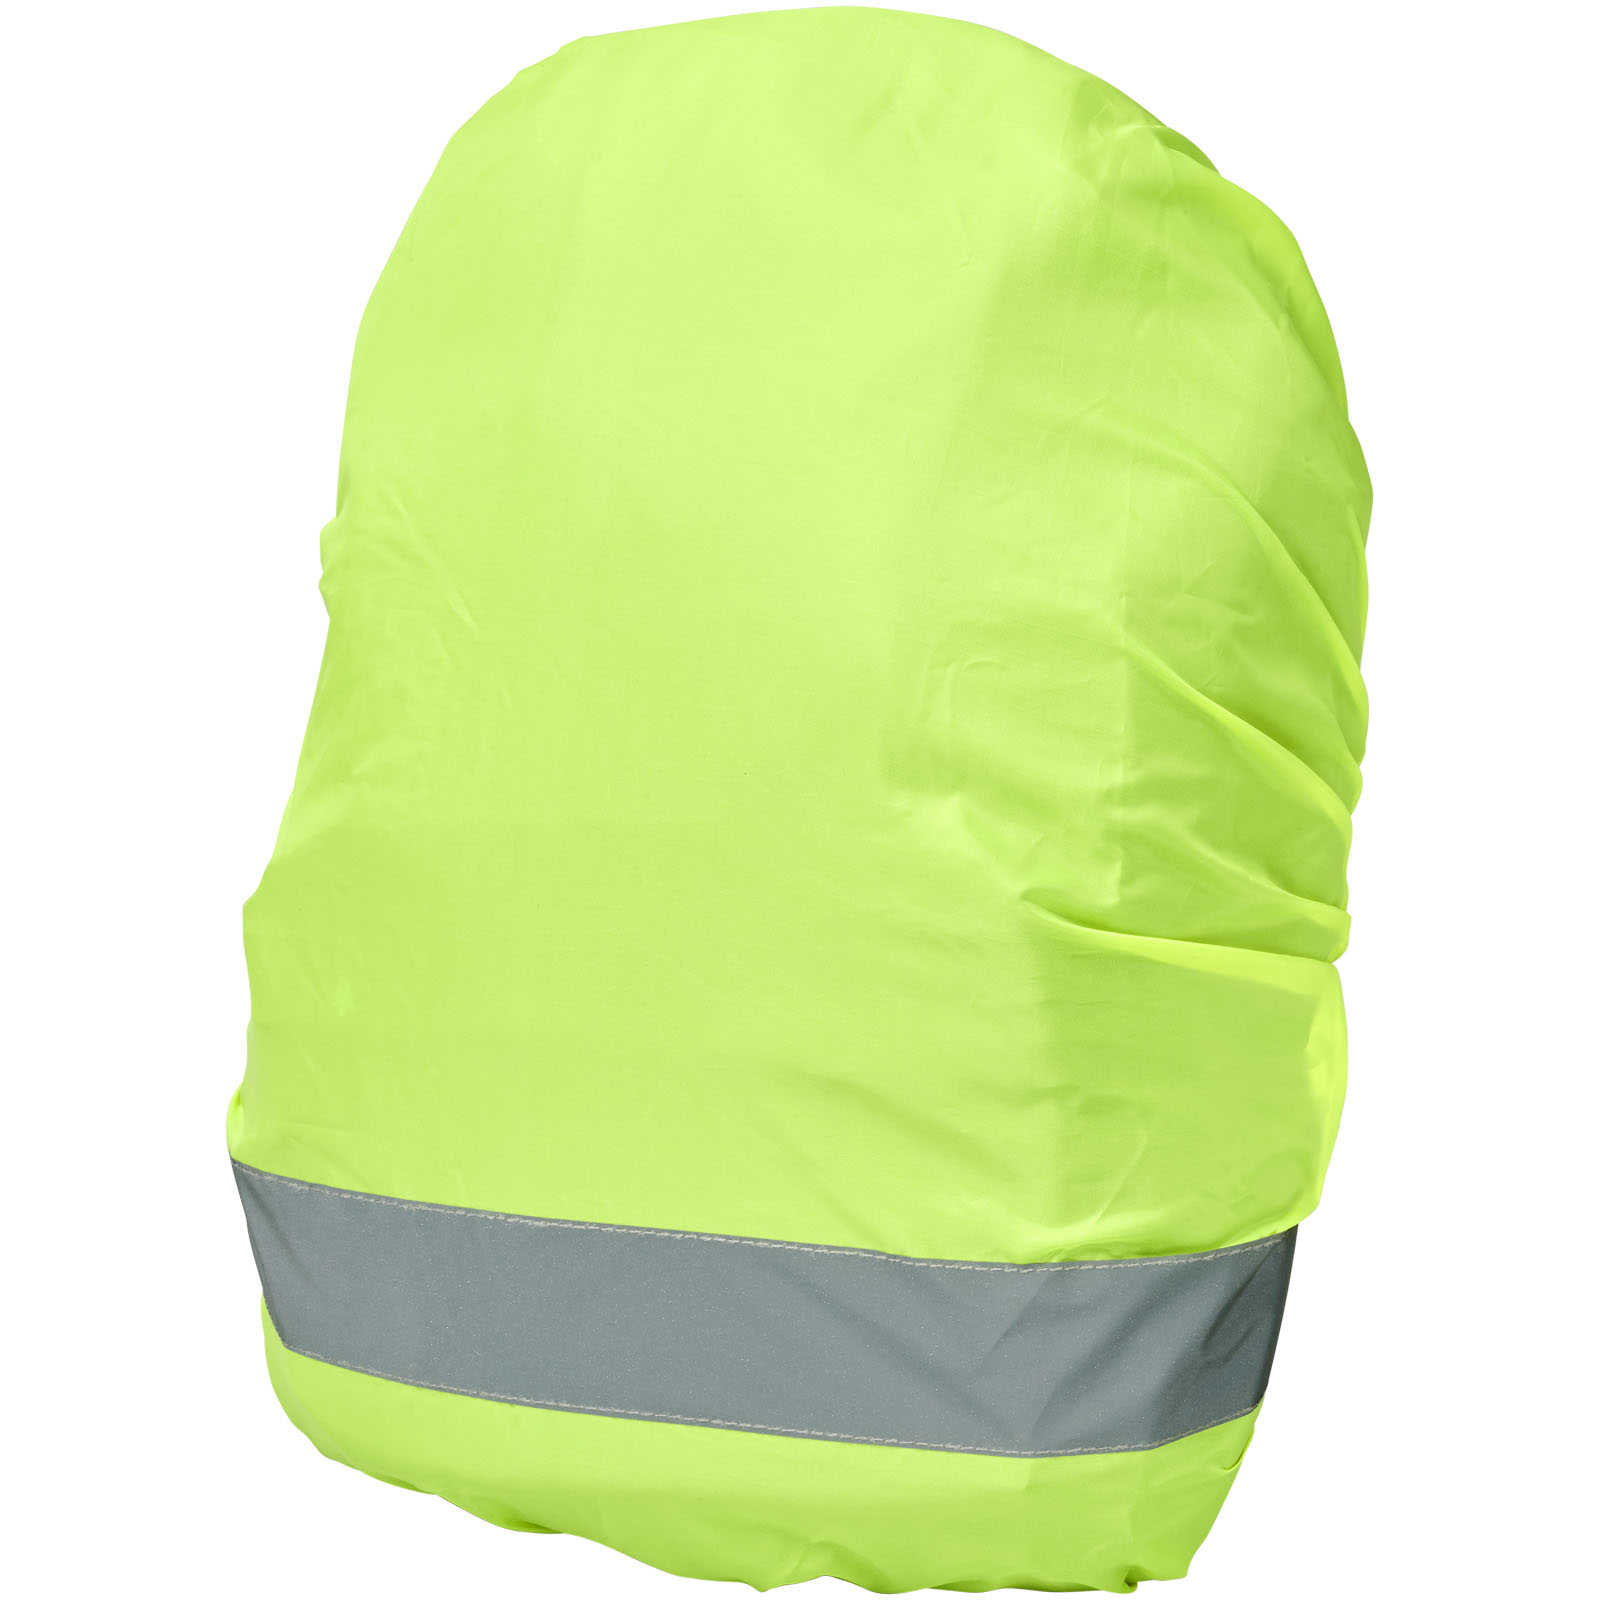 Reflective Items - RFX™ William reflective and waterproof bag cover